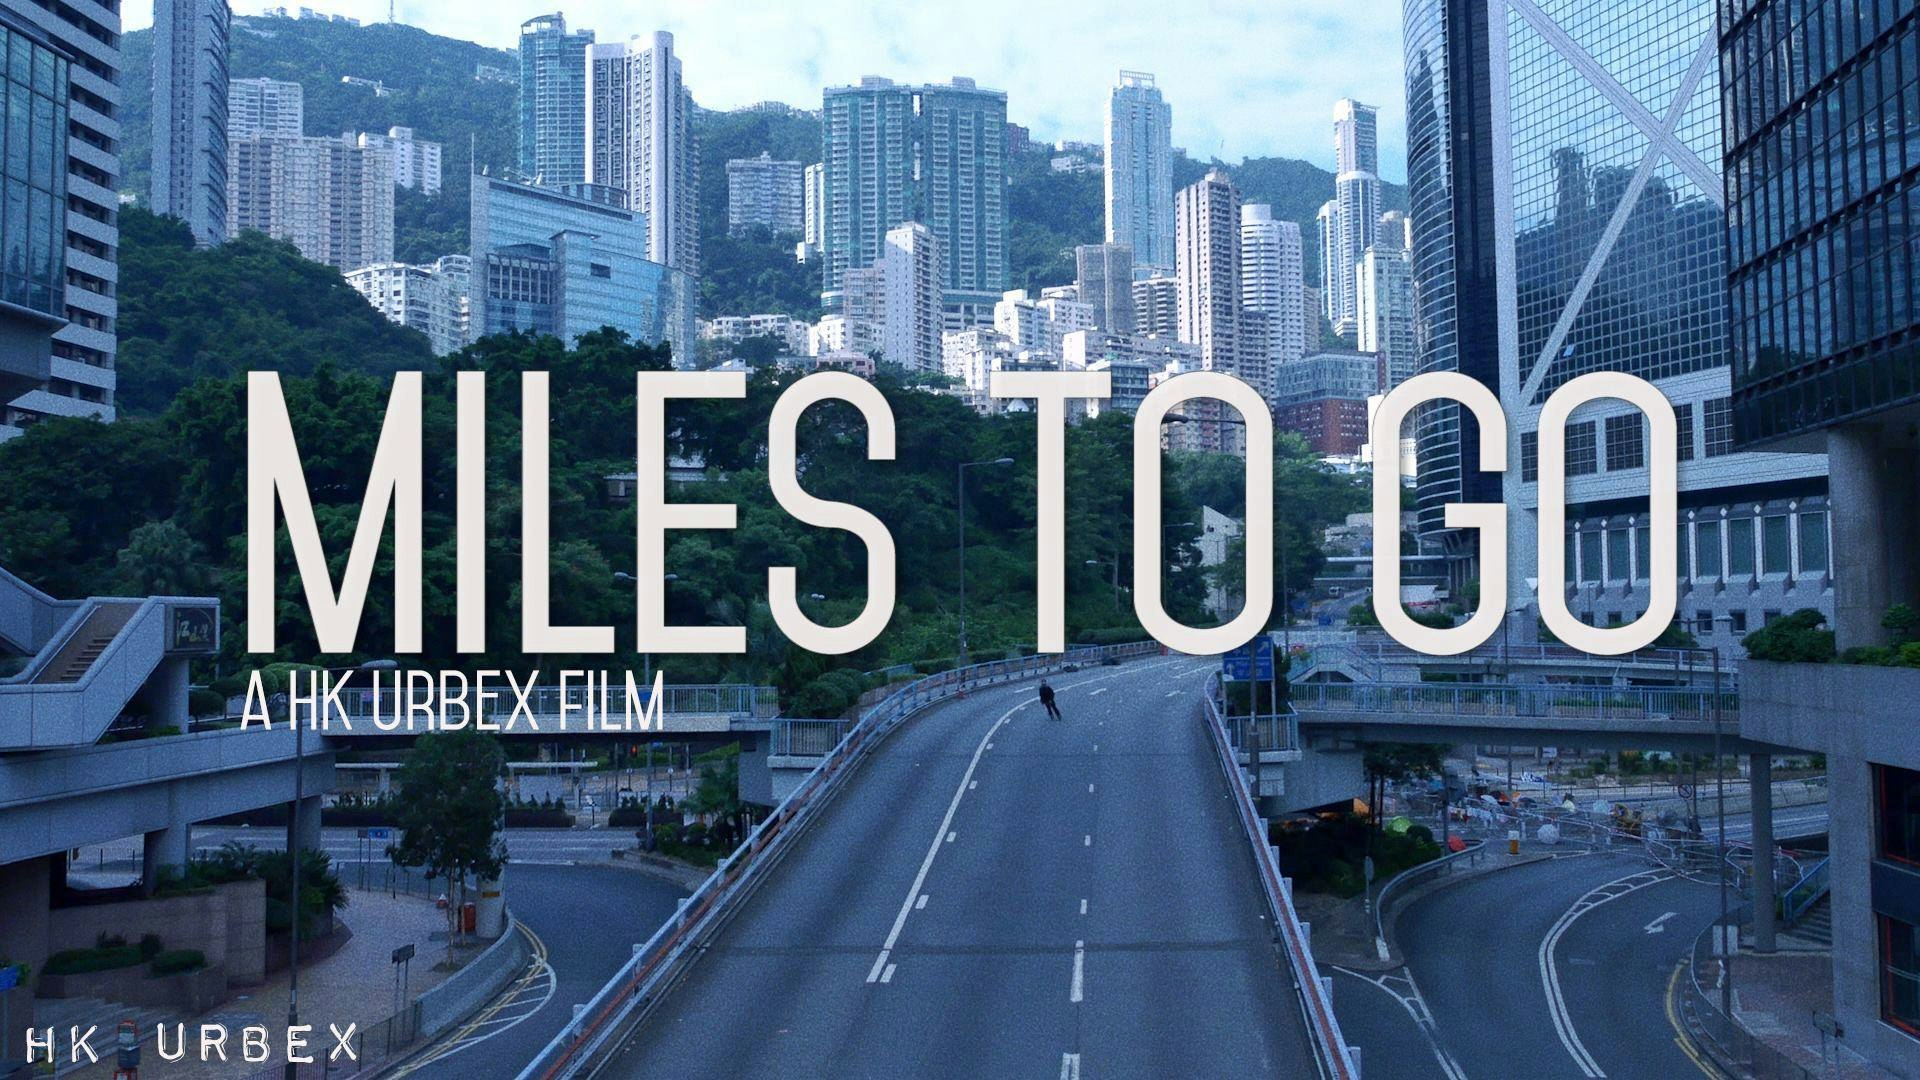 An image still from the short film "Miles to Go" showing a Hong Kong street with apartment blocks on hills